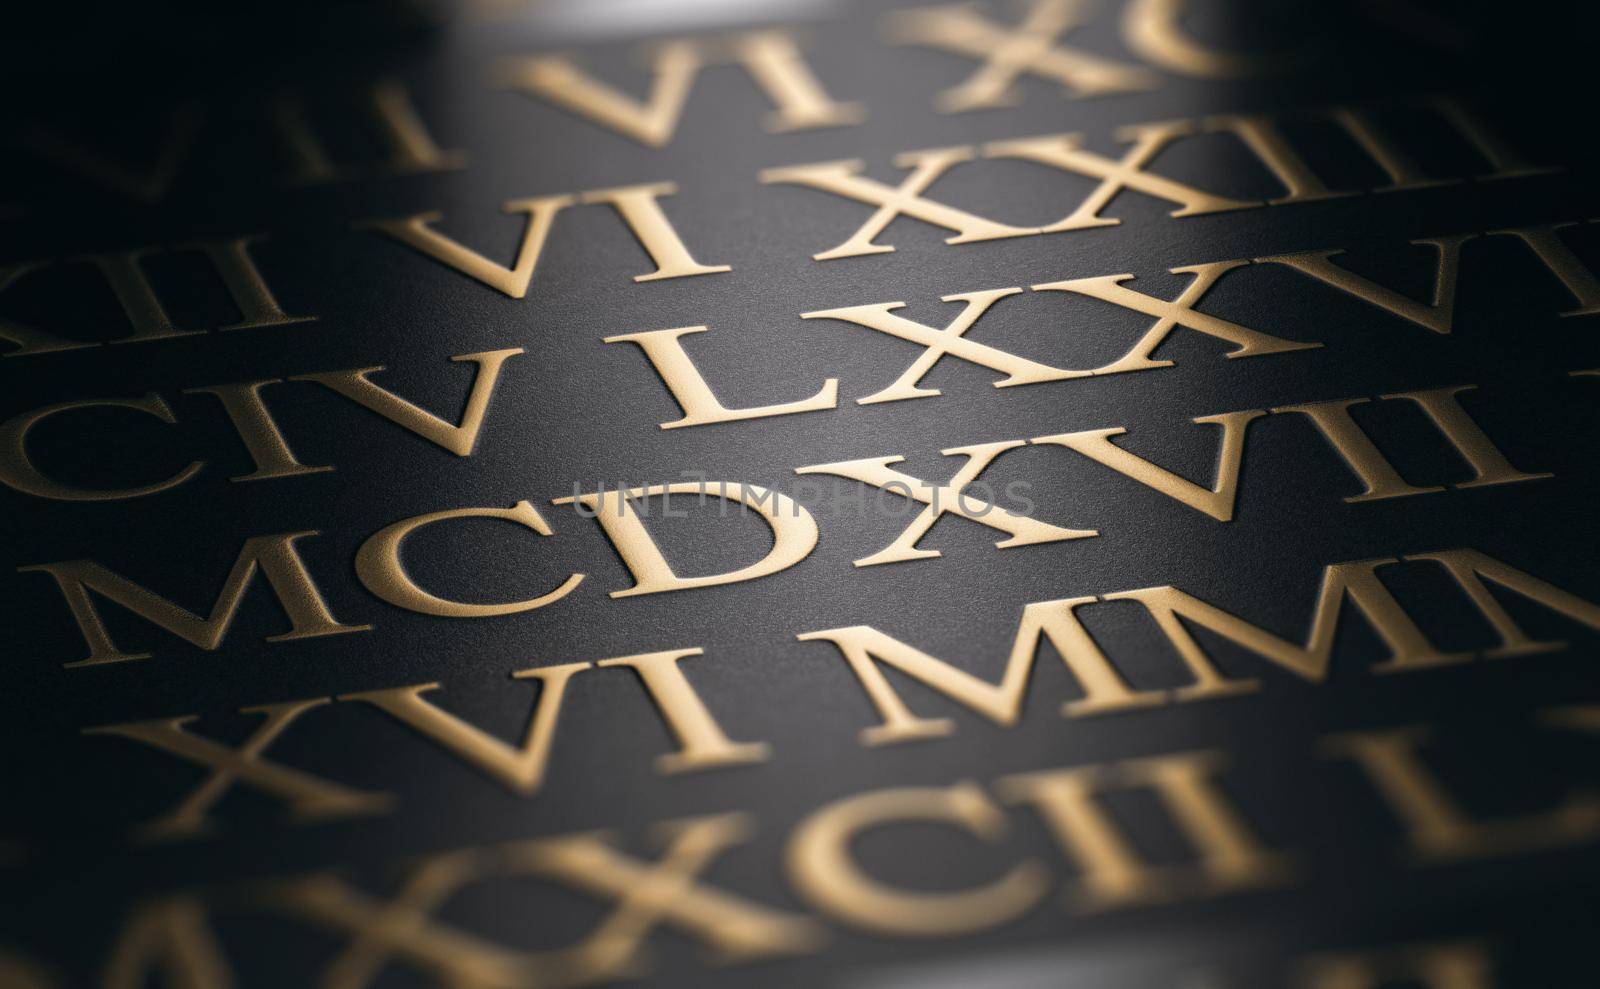 Roman Numerals. Latin Alphabet. by Olivier-Le-Moal